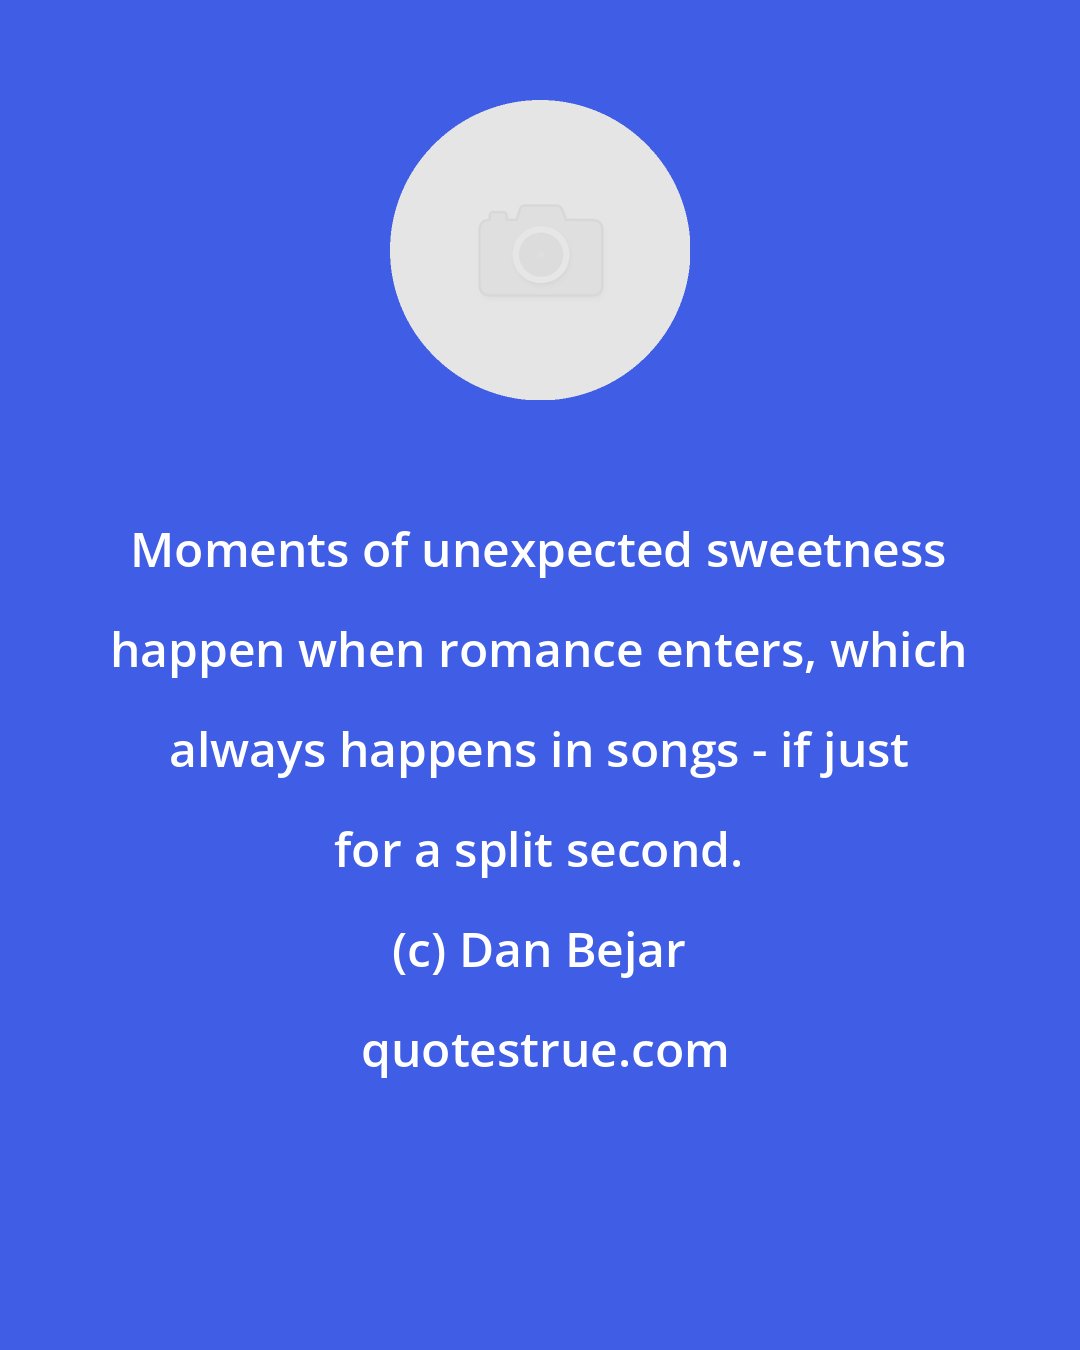 Dan Bejar: Moments of unexpected sweetness happen when romance enters, which always happens in songs - if just for a split second.